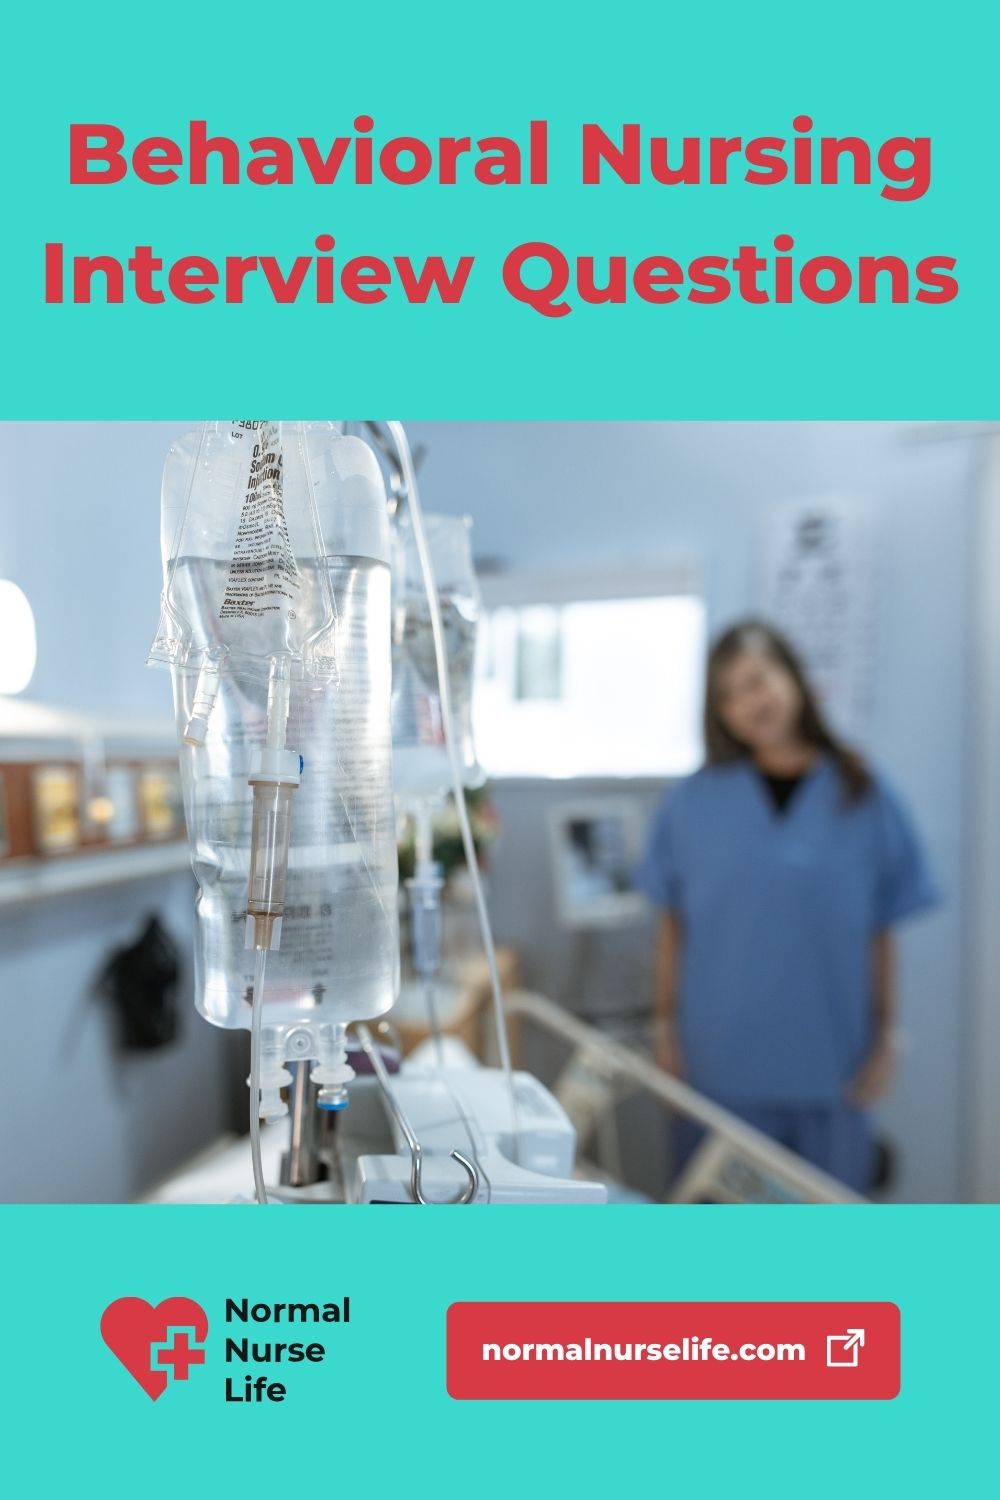 Behavioral interview questions for nurses and answers